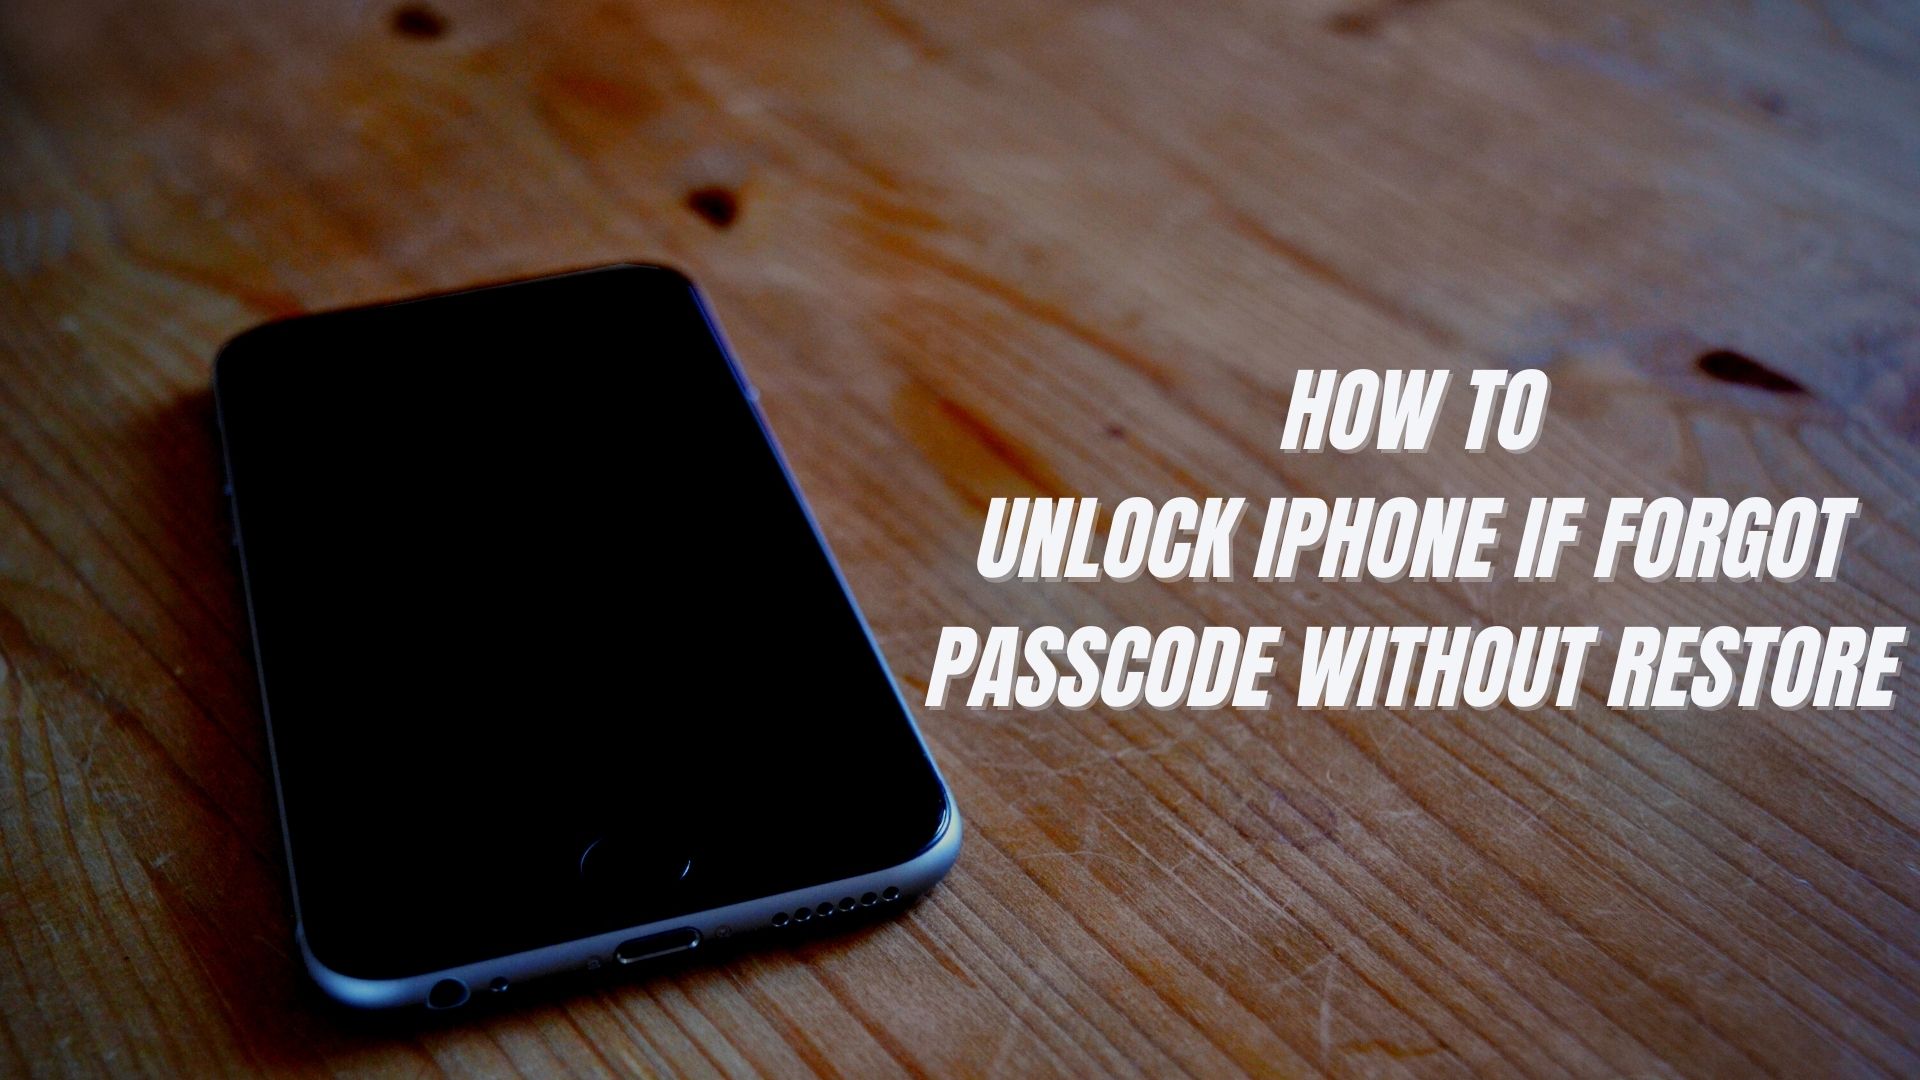 Unlock iPhone if Forgot Passcode without Restore